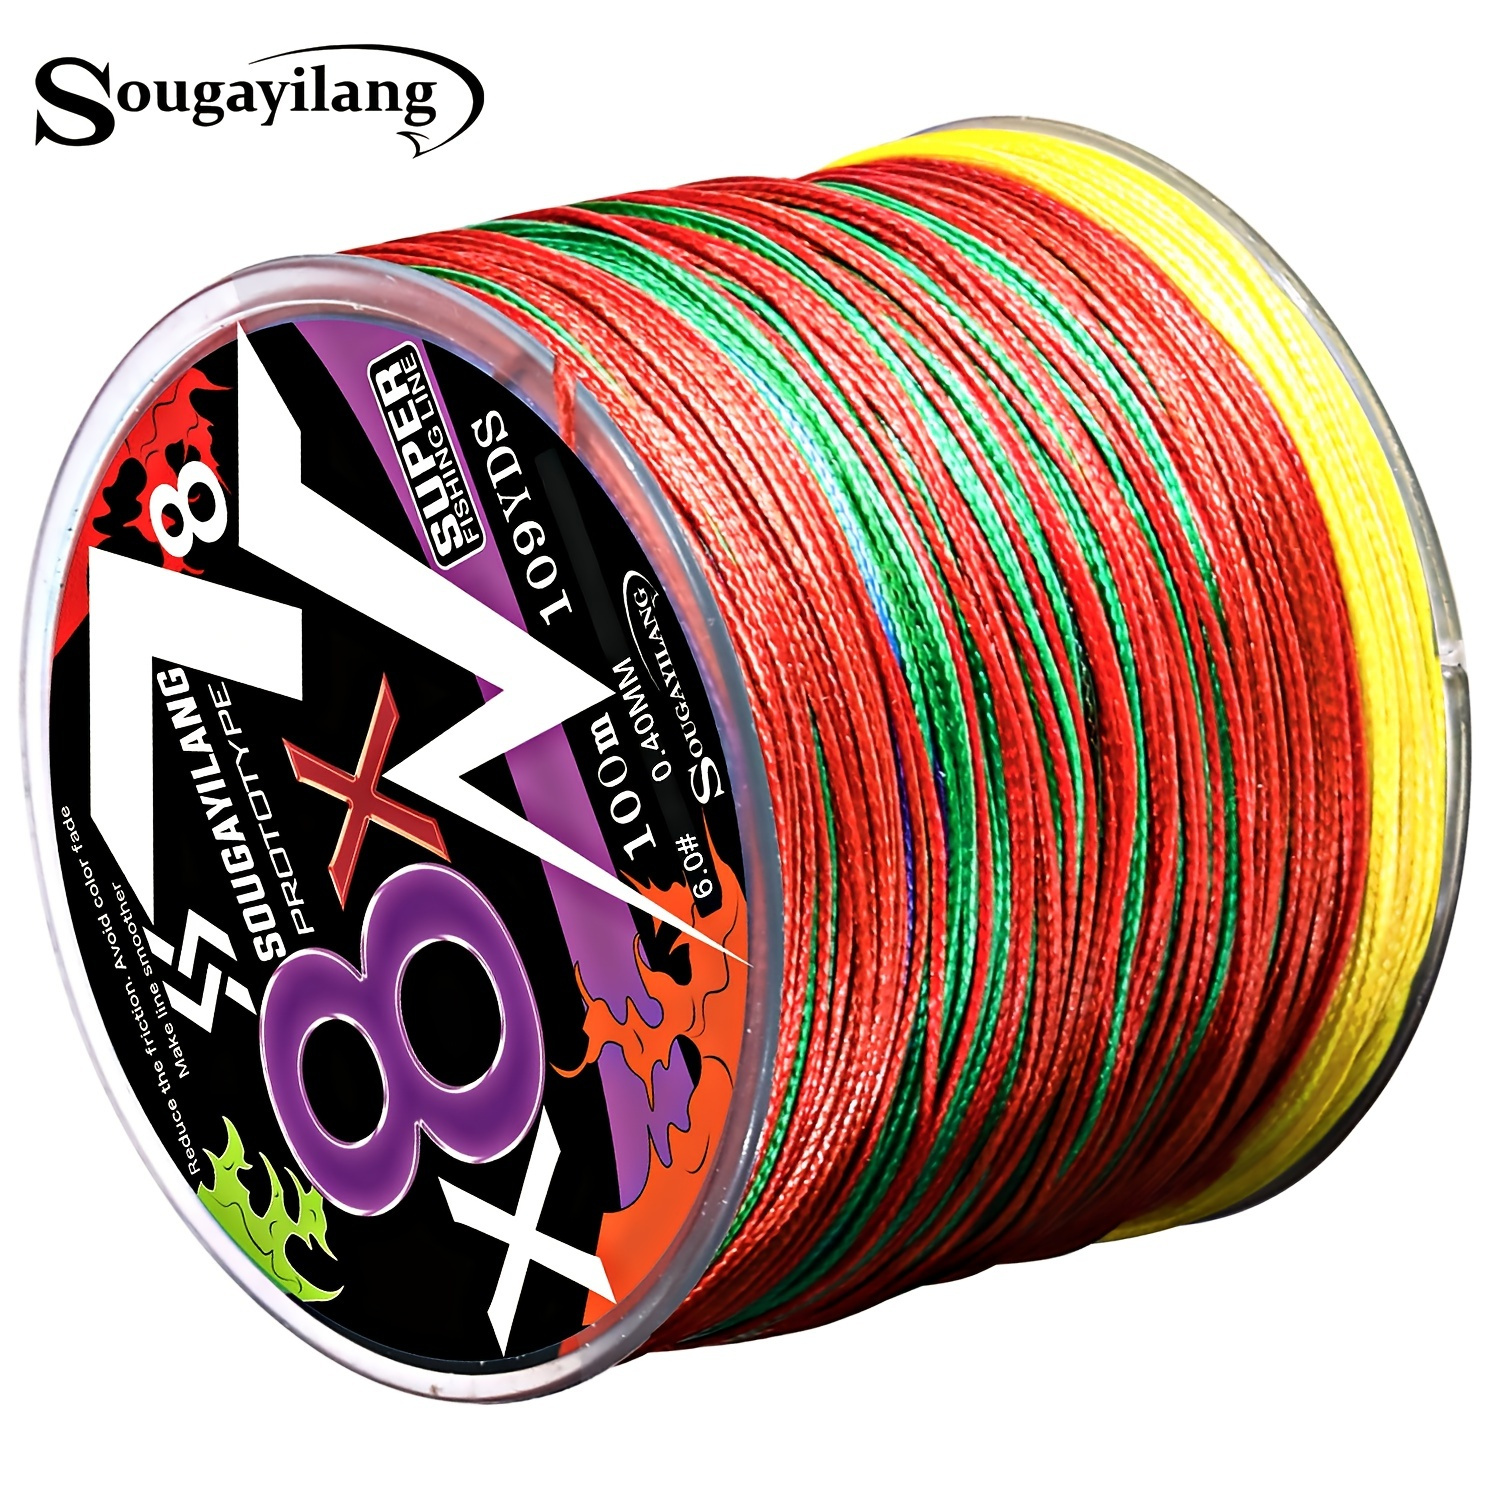 

Sougayilang 8 Strands Braided Fishing Line - 109yds Abrasion Resistant Multifilament Line For Saltwater And Freshwater Fishing - High Performance Outdoor Fishing Gear